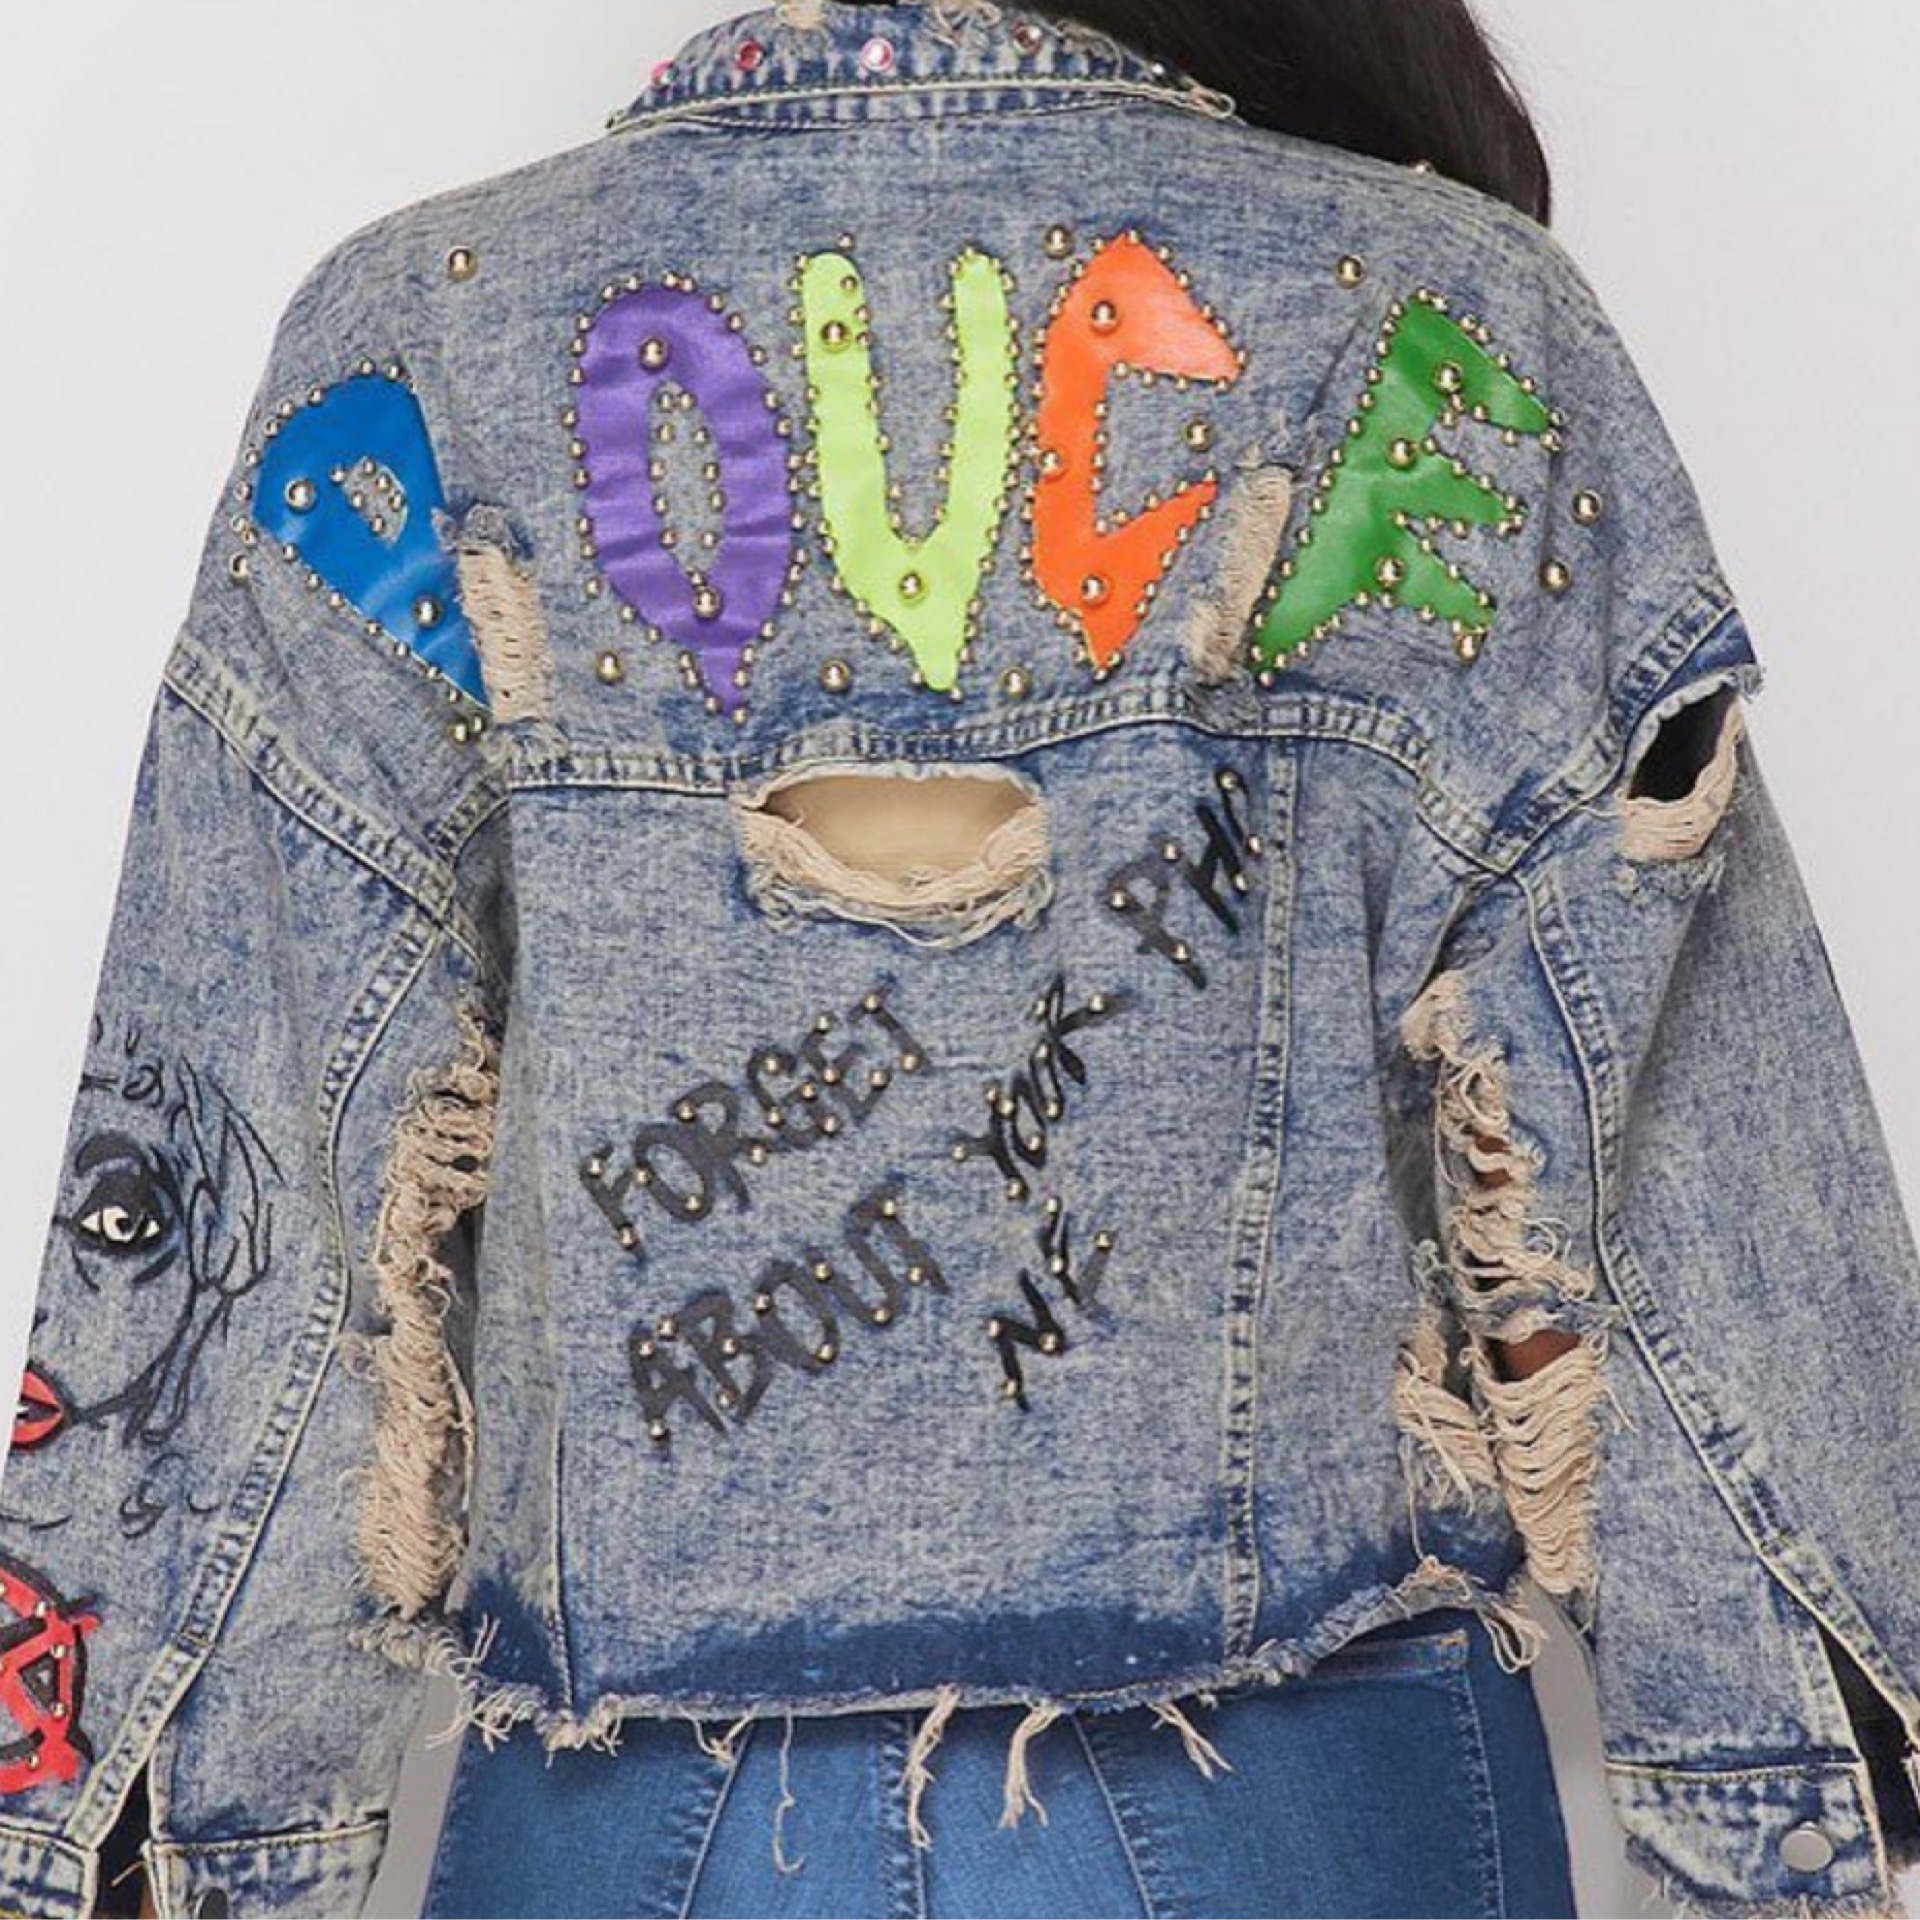 Be the first to review “Graphic Jean Jacket sold out” Cancel reply